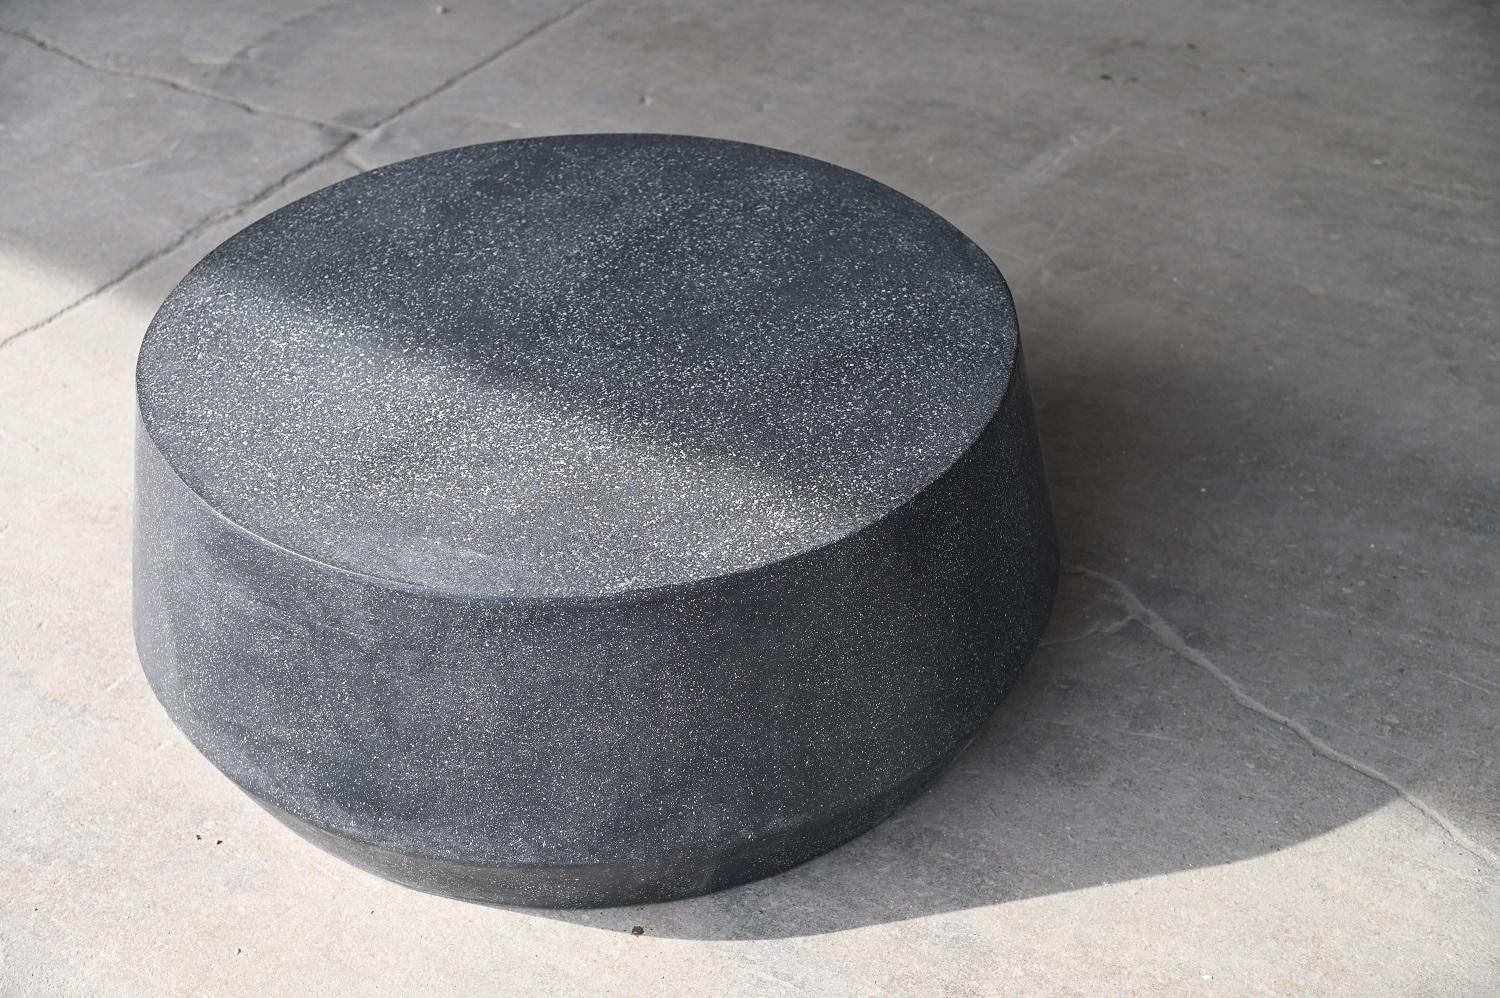 Minimalist Cast Resin 'Tom' Low Table, Coal Stone Finish by Zachary A. Design For Sale